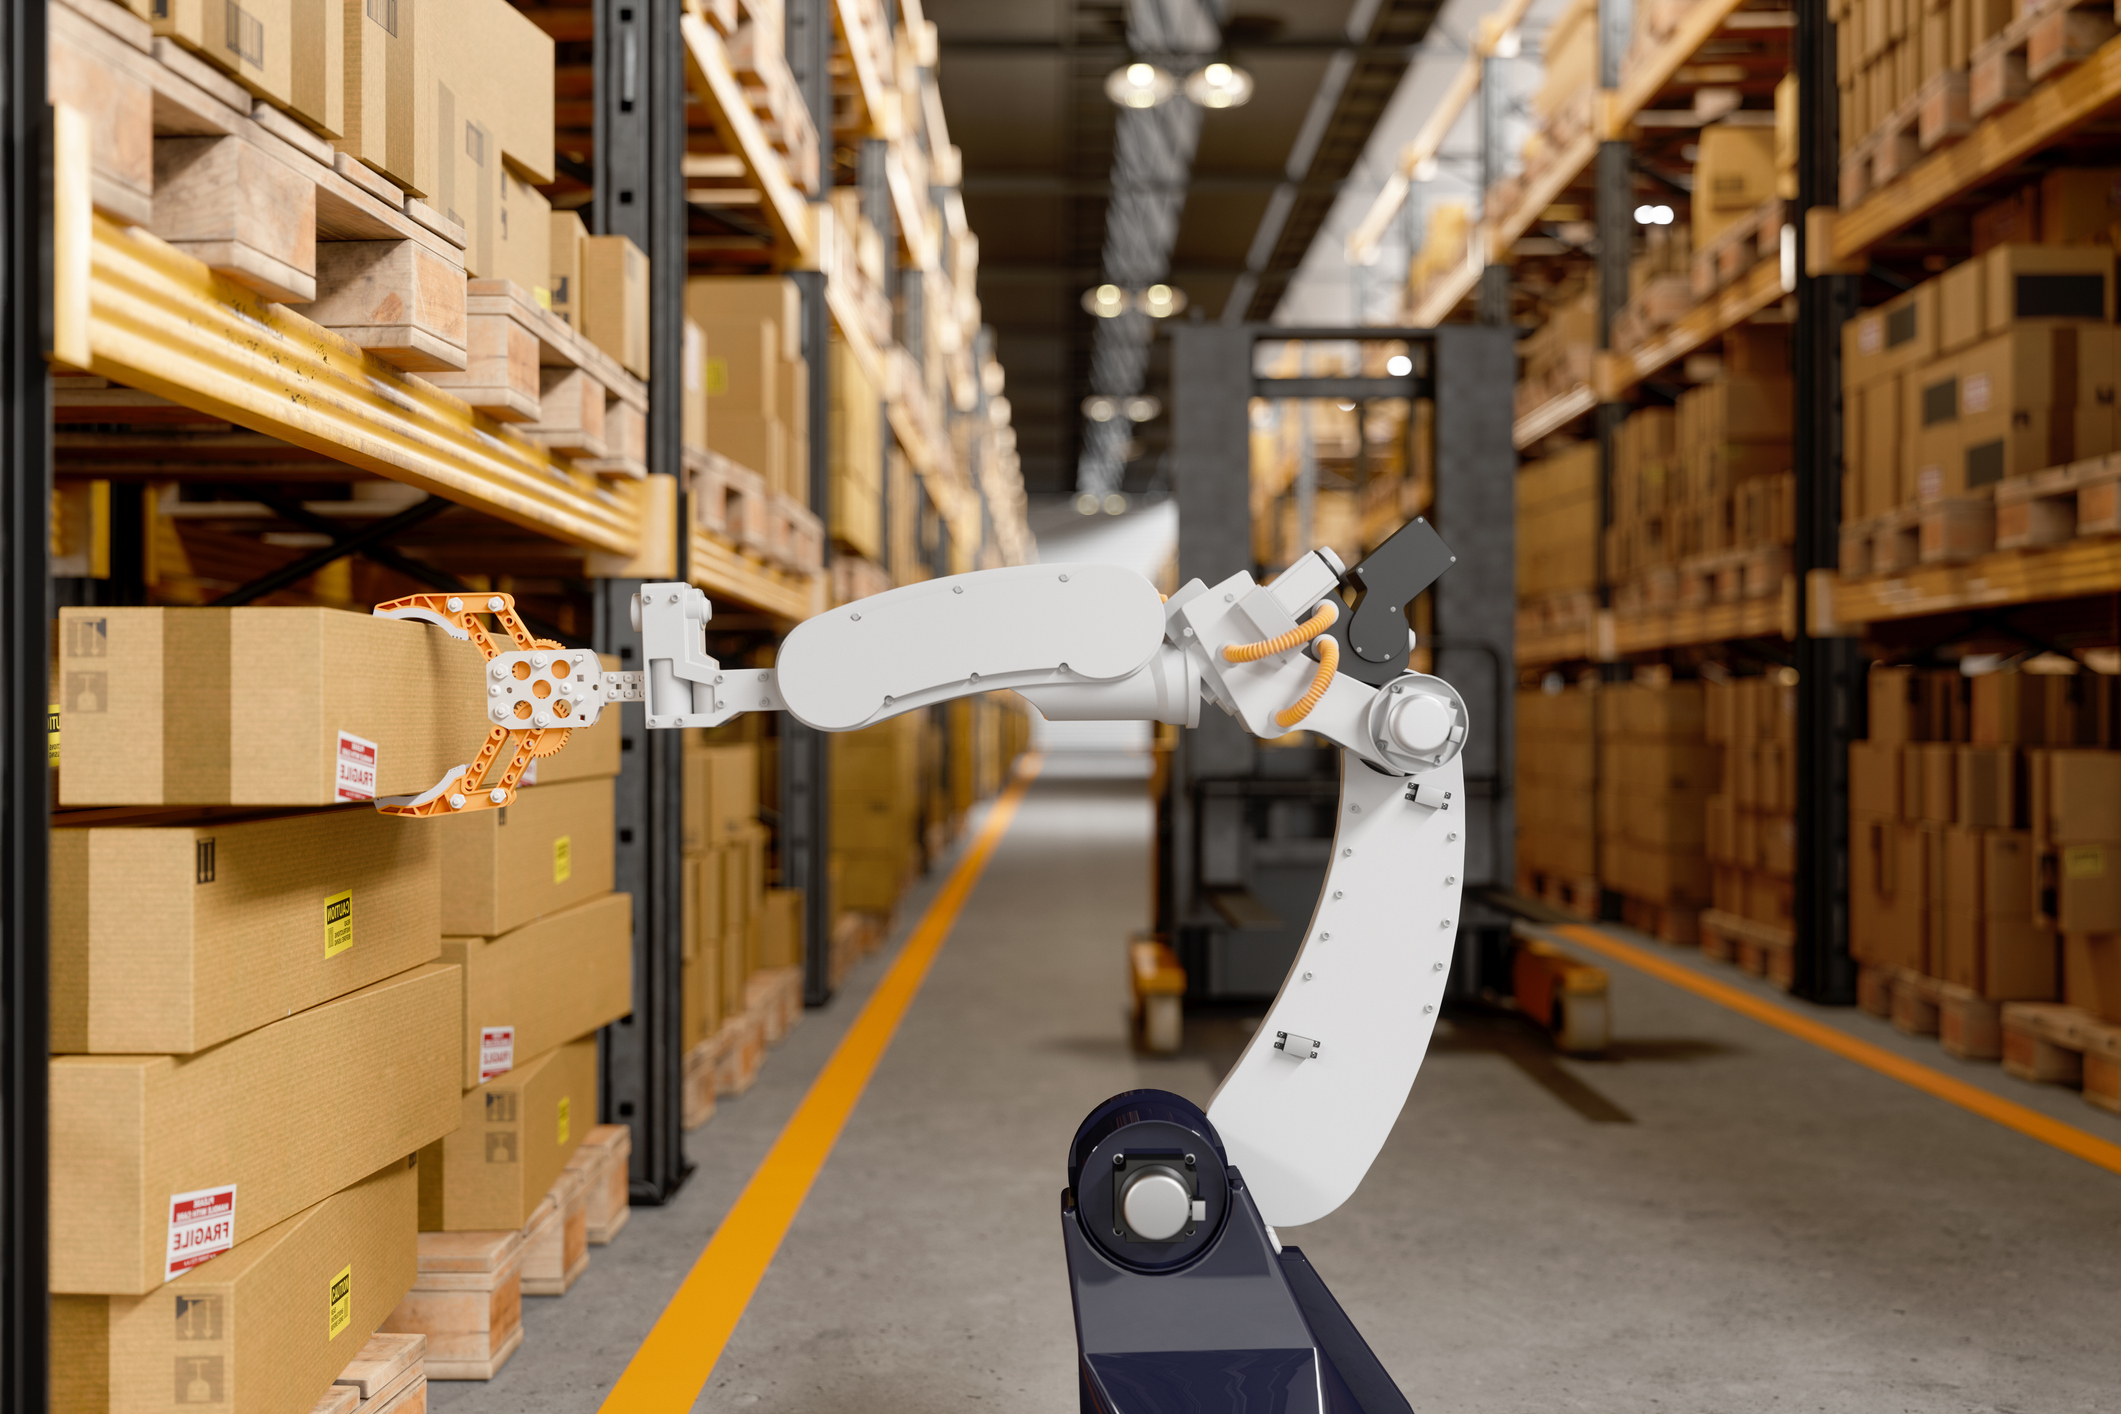 Robot Arm Taking A Cardboard Box In The Warehouse